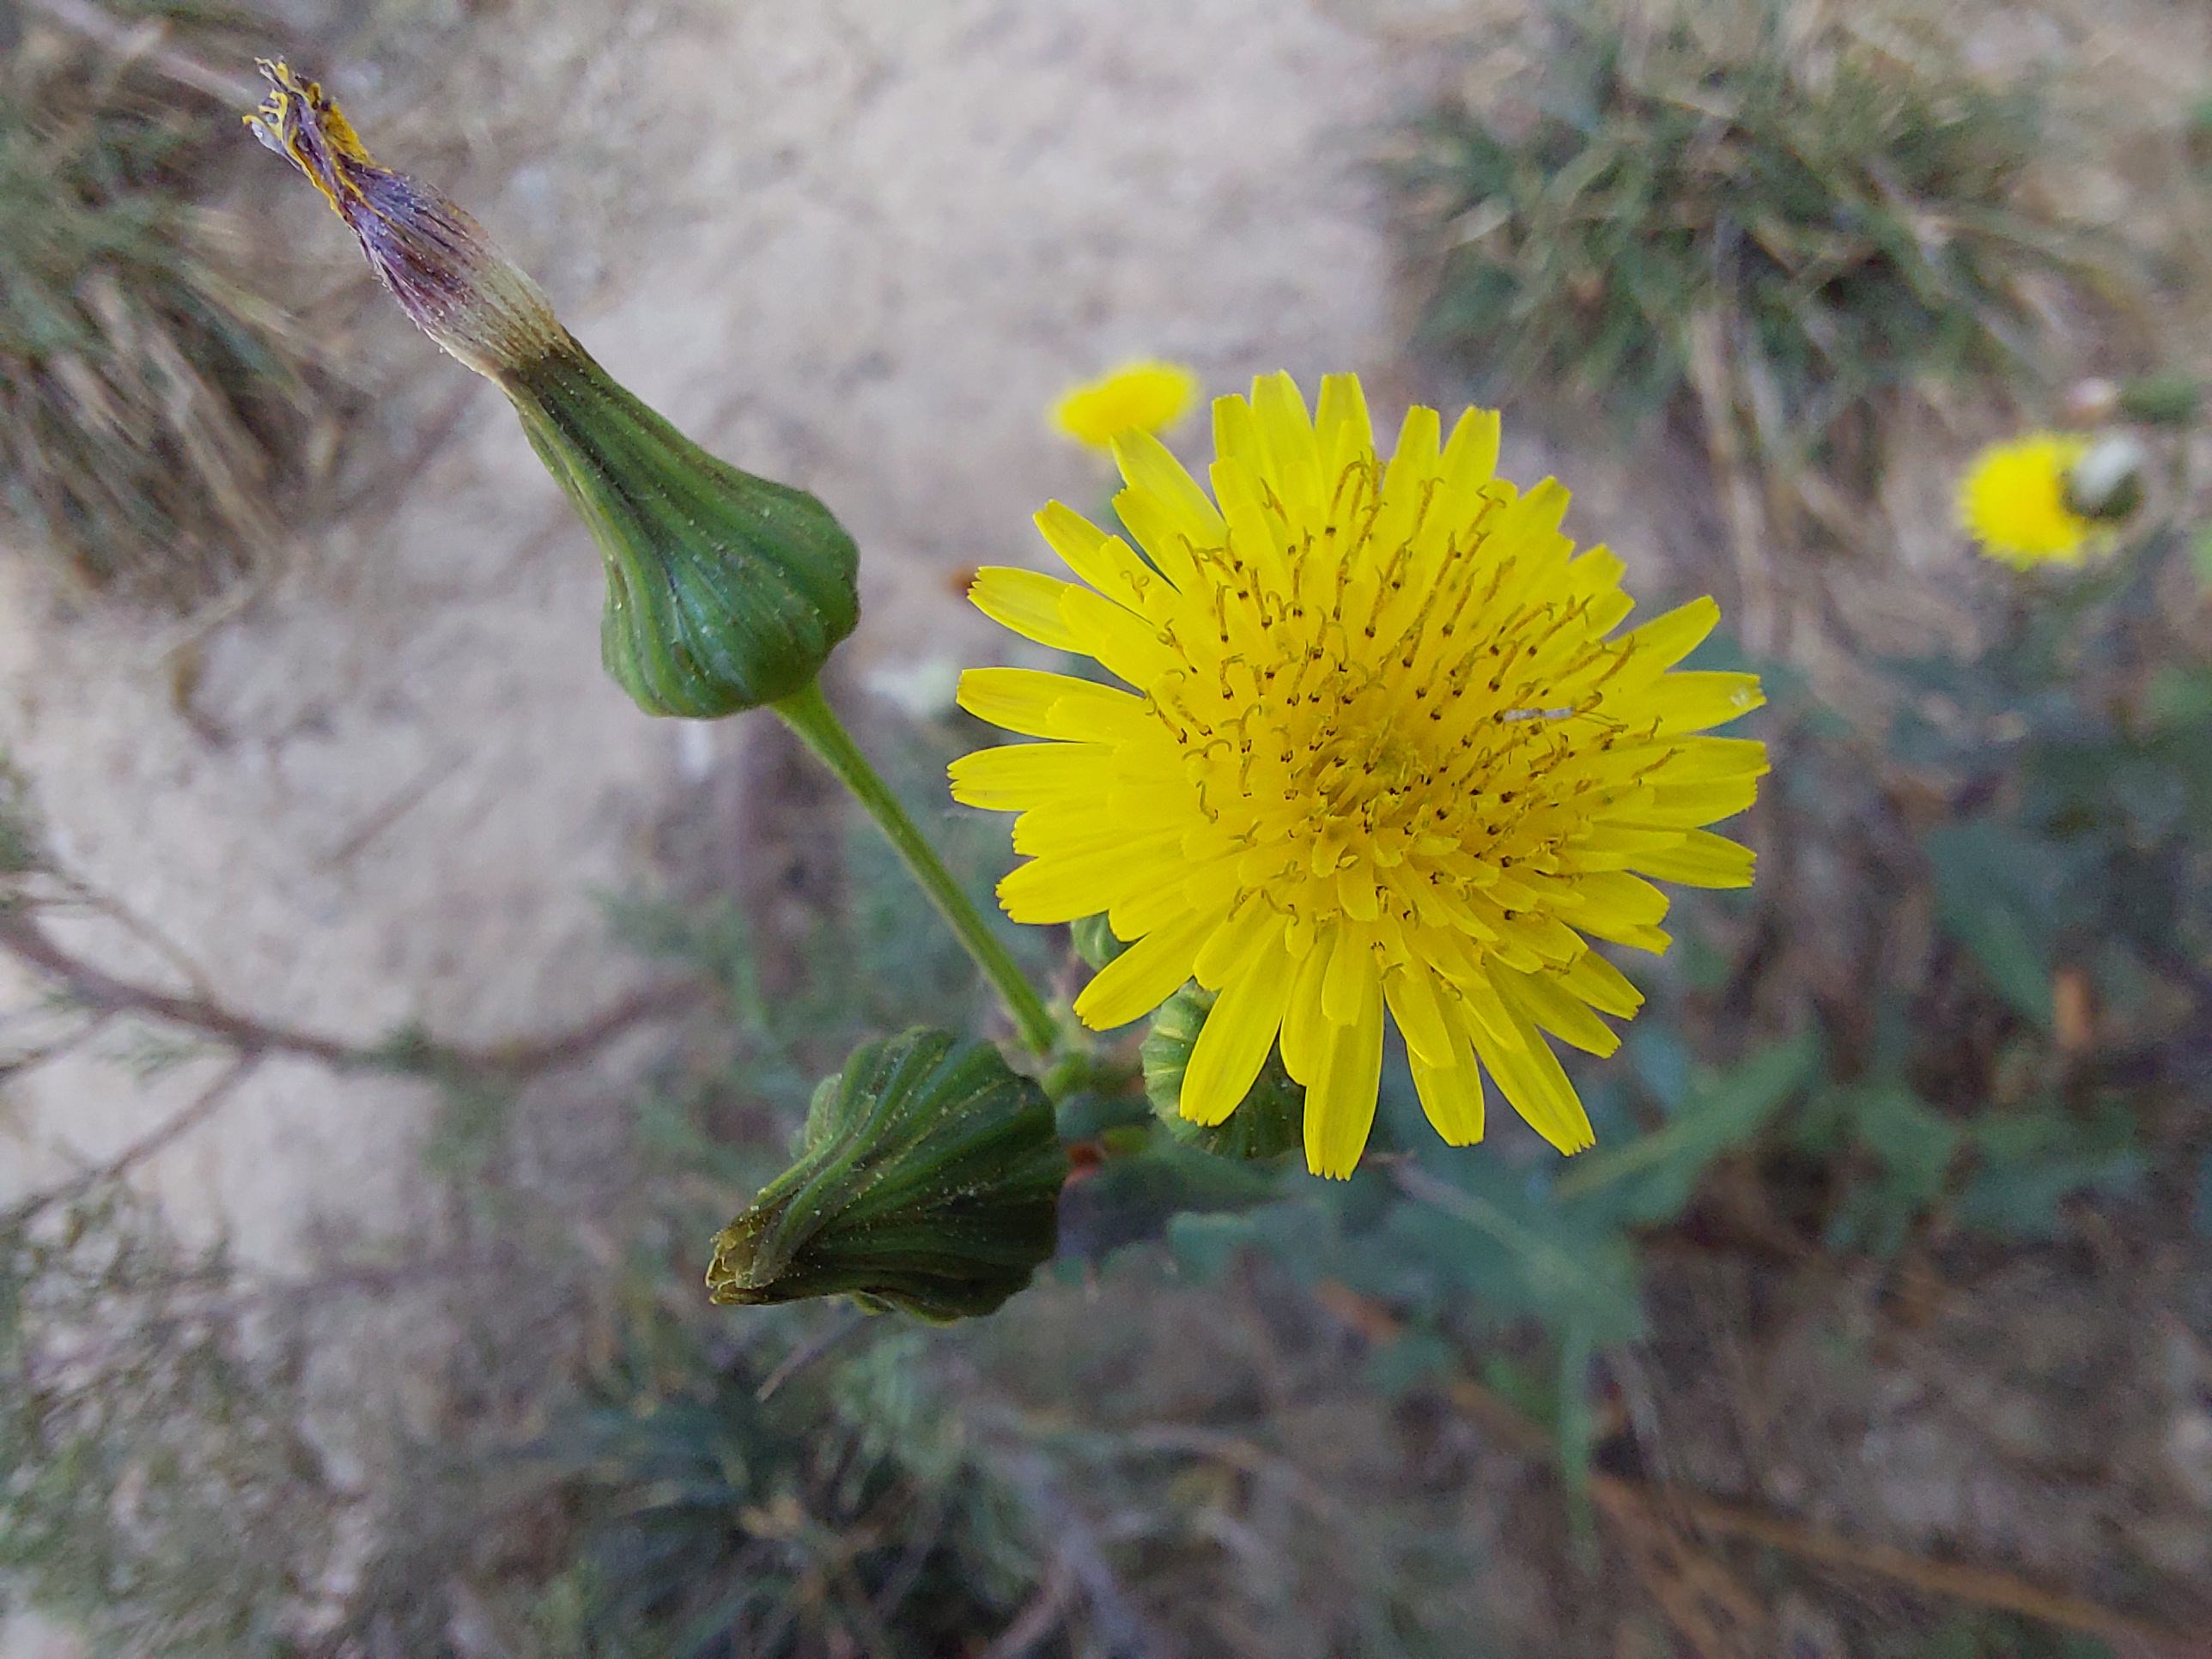 Sample photo of the Galaxy A52 macro camera - a yellow flower up close